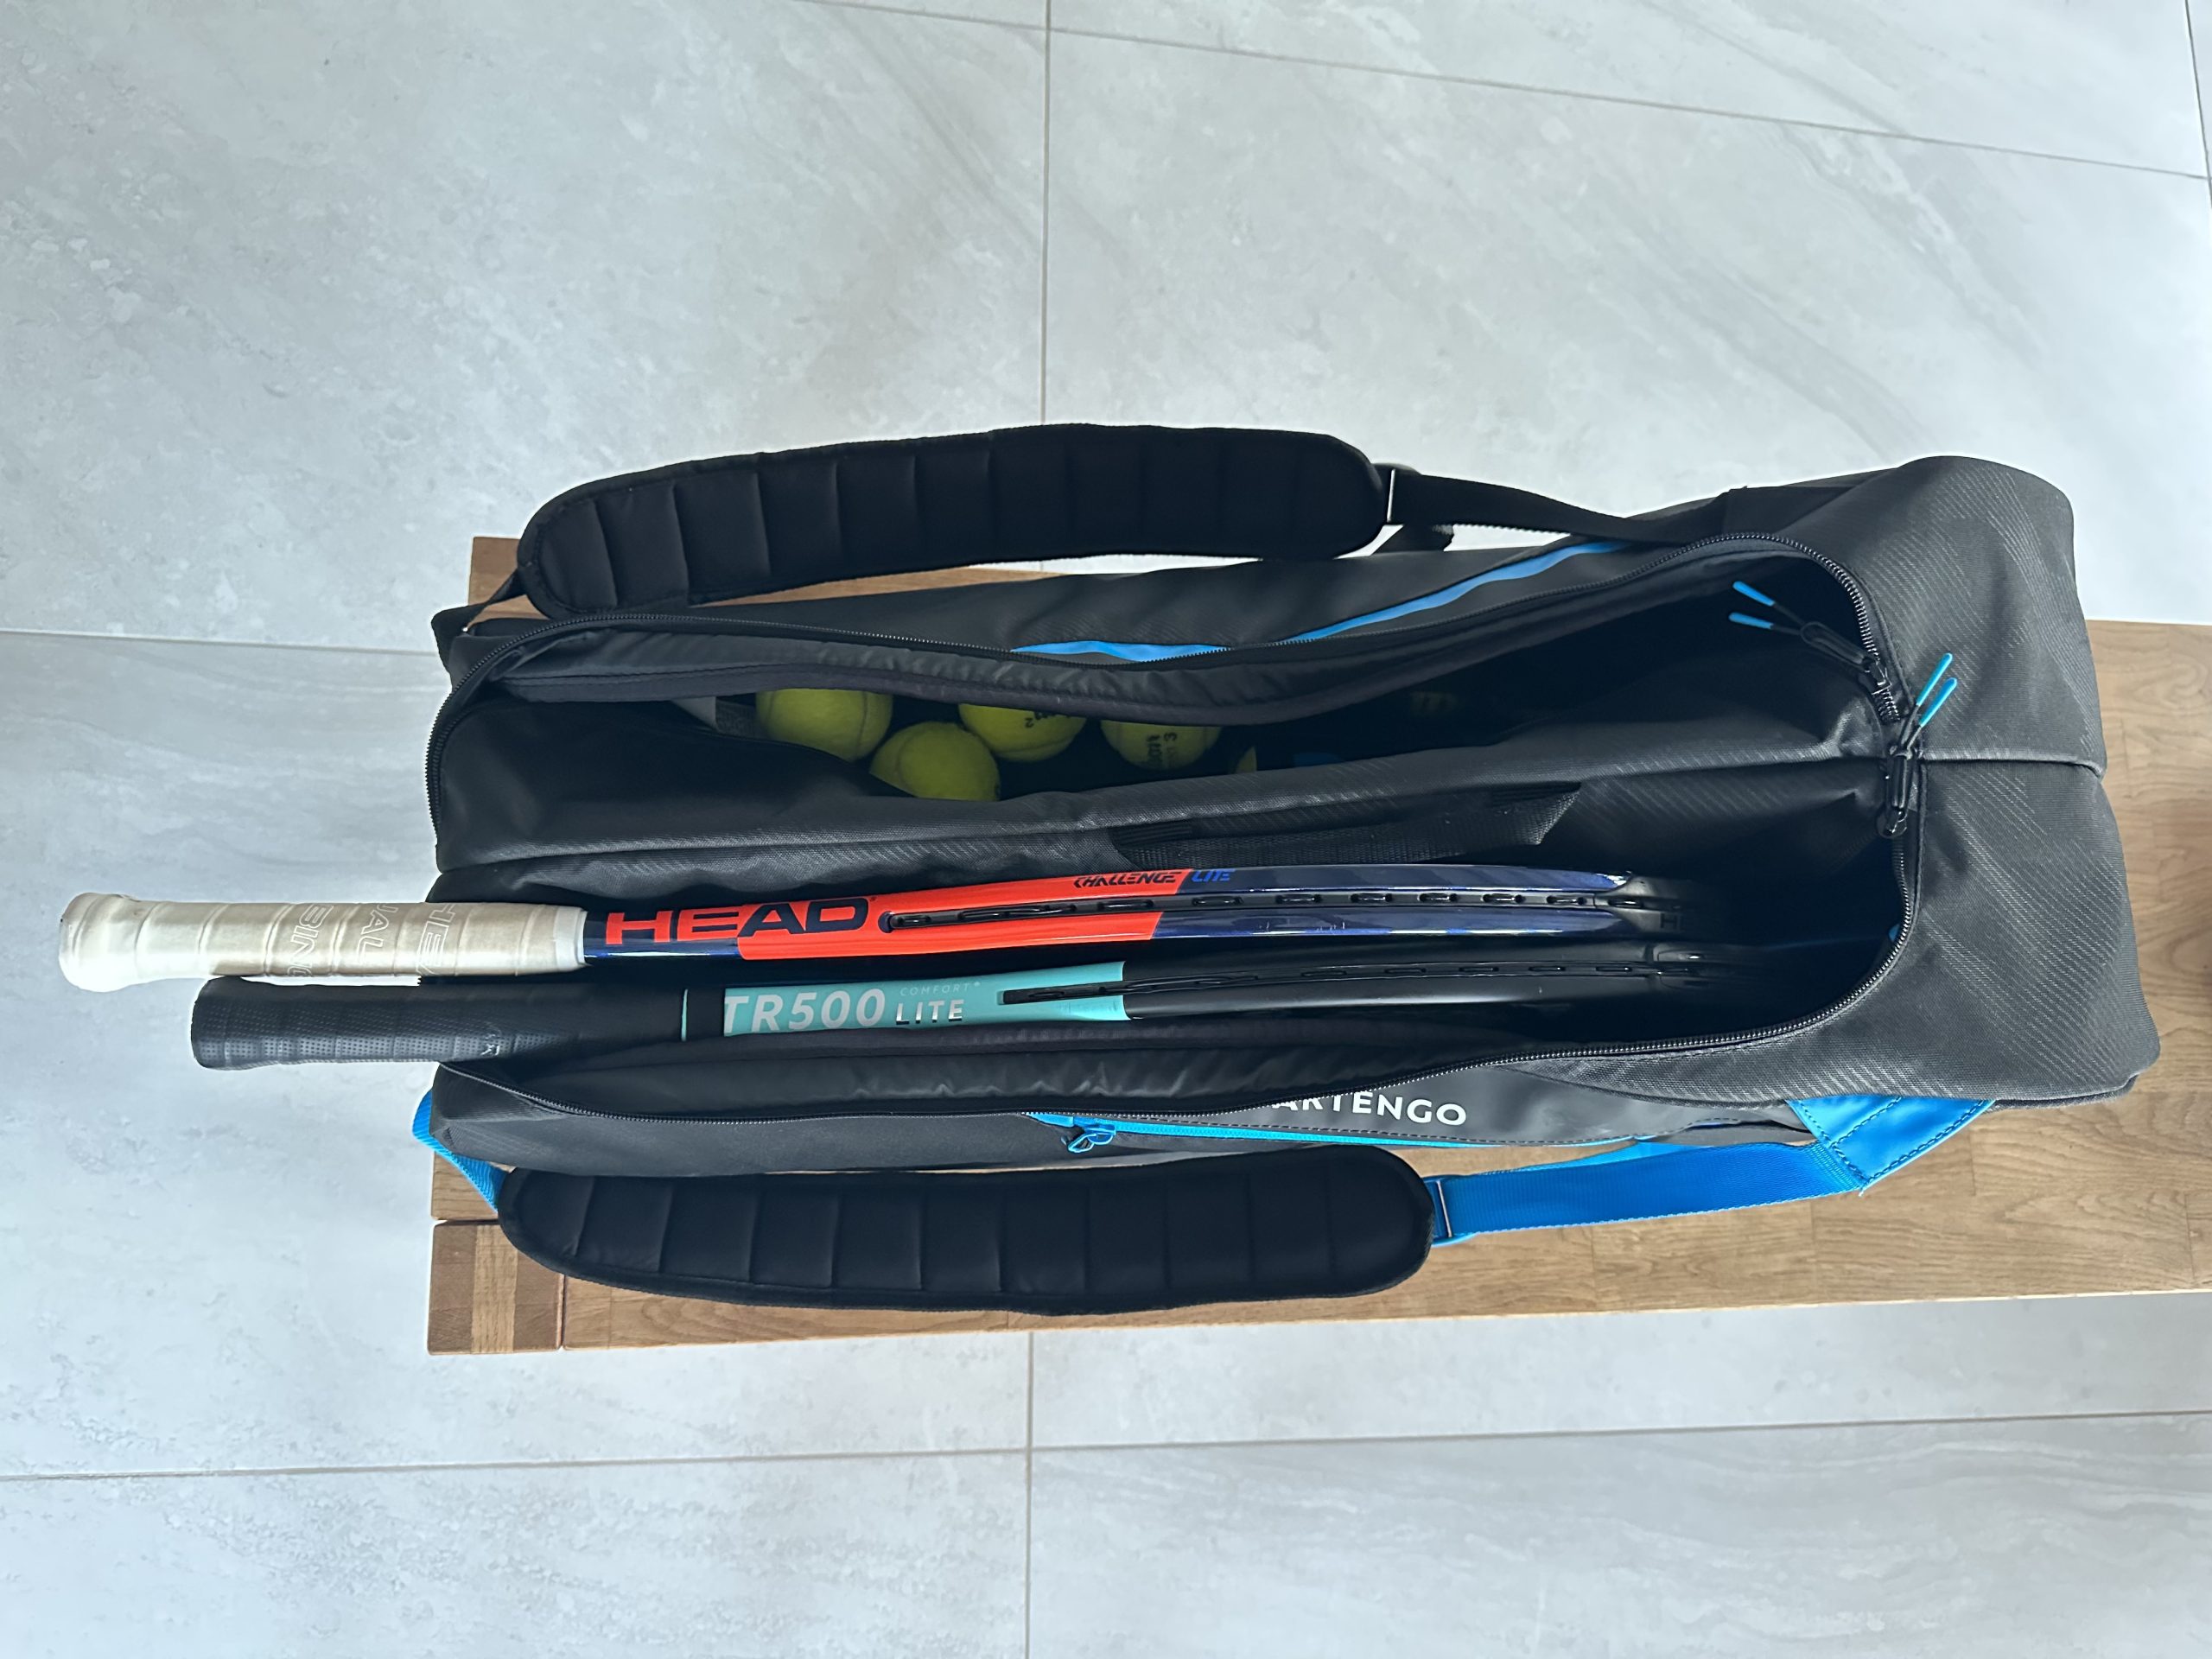 Tennis bag with two rackets and multiple tennis balls, ready for the game.